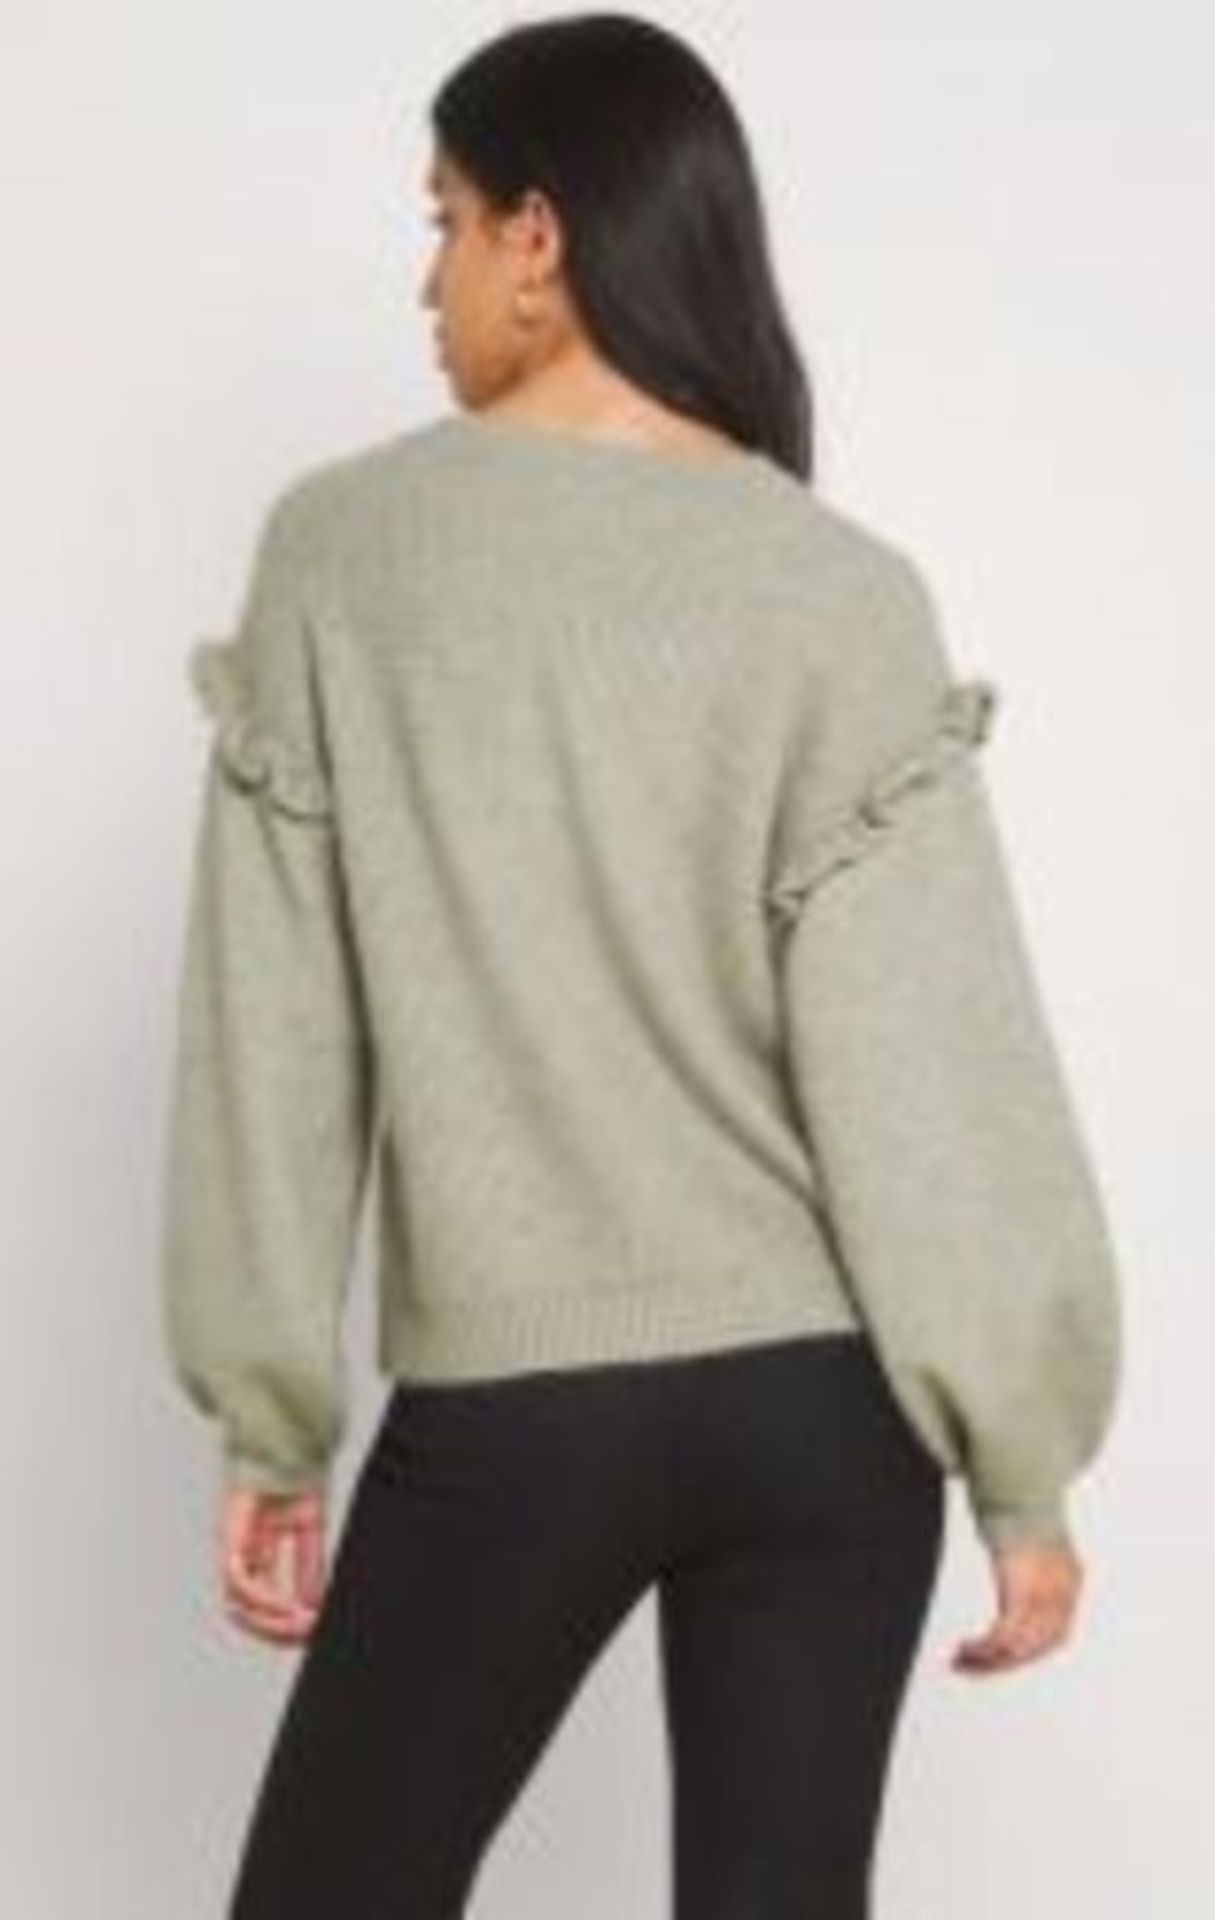 JDY - HUDSON LIFE BIG SLEEVE JUMPER - ABBEY STONE GREY - SIZE: MEDIUM. RRP £25.00 AS NEW WITH TAGS - Image 2 of 3